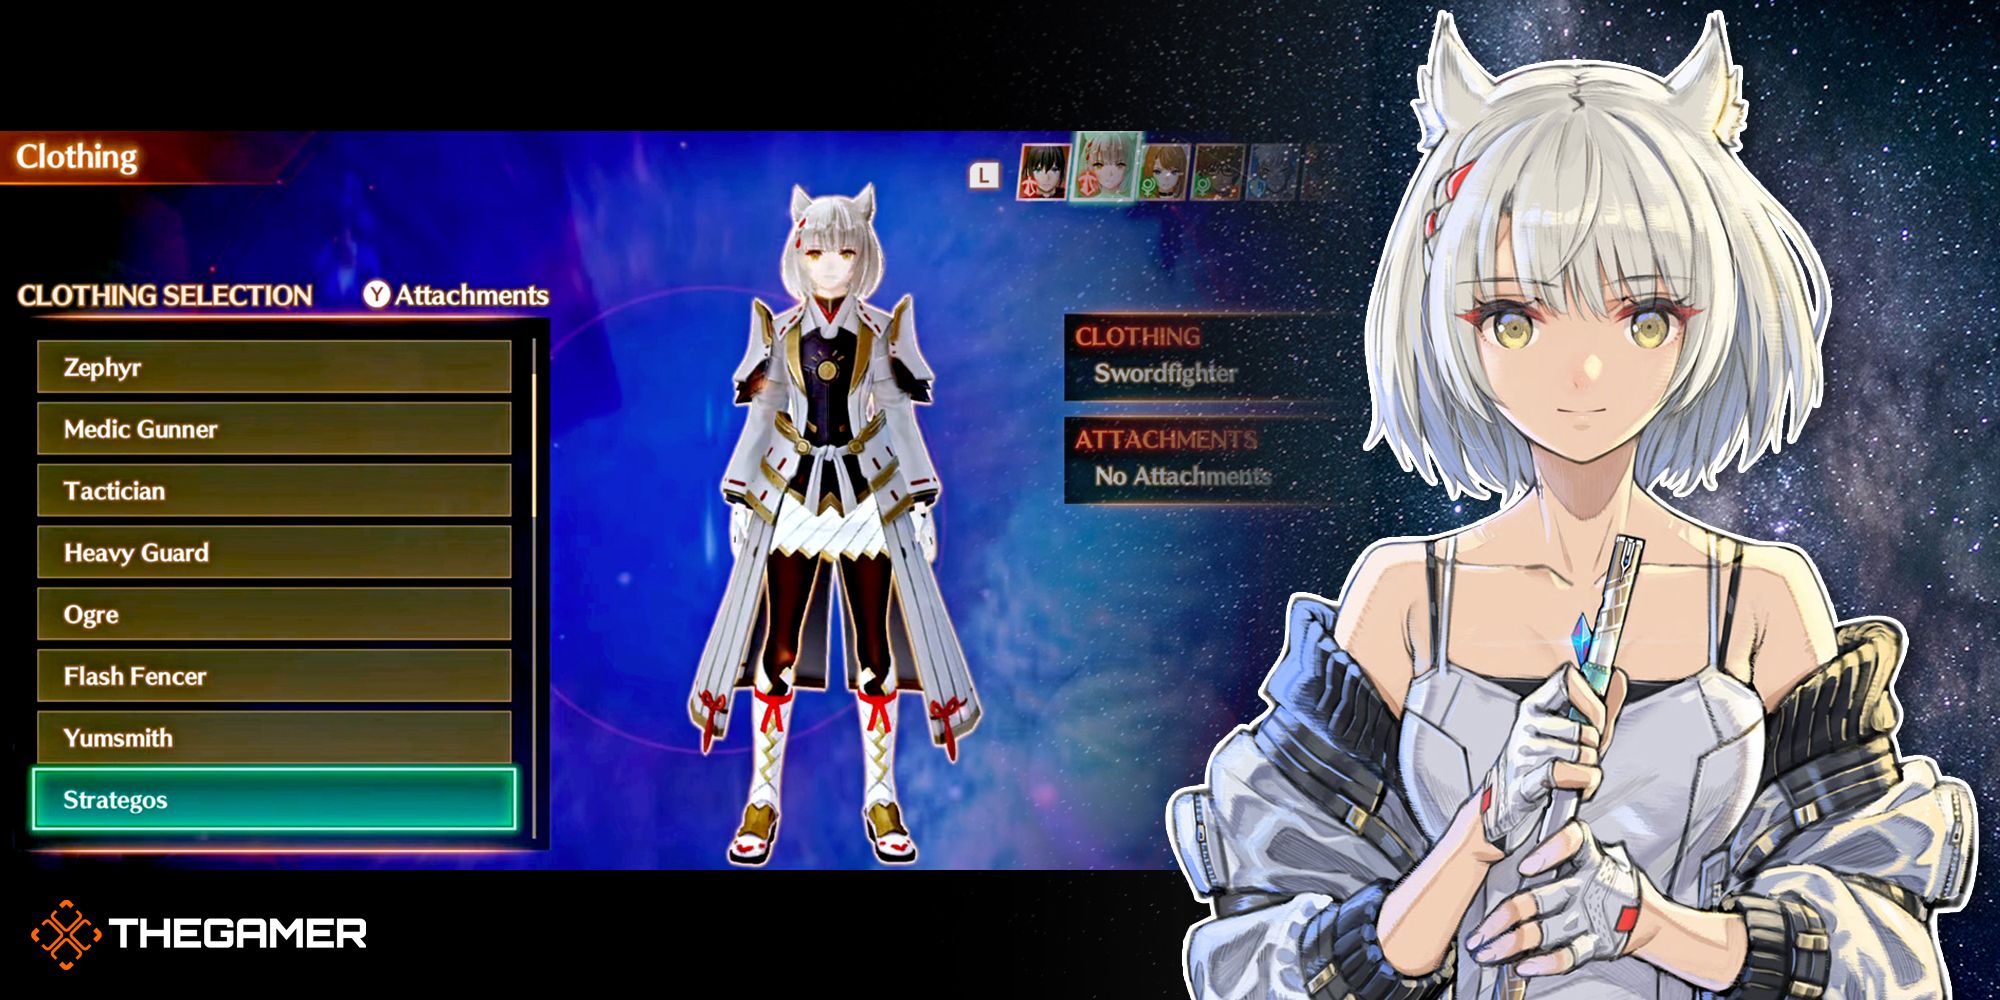 Game screen and art of Mio from Xenoblade Chronicles 3.